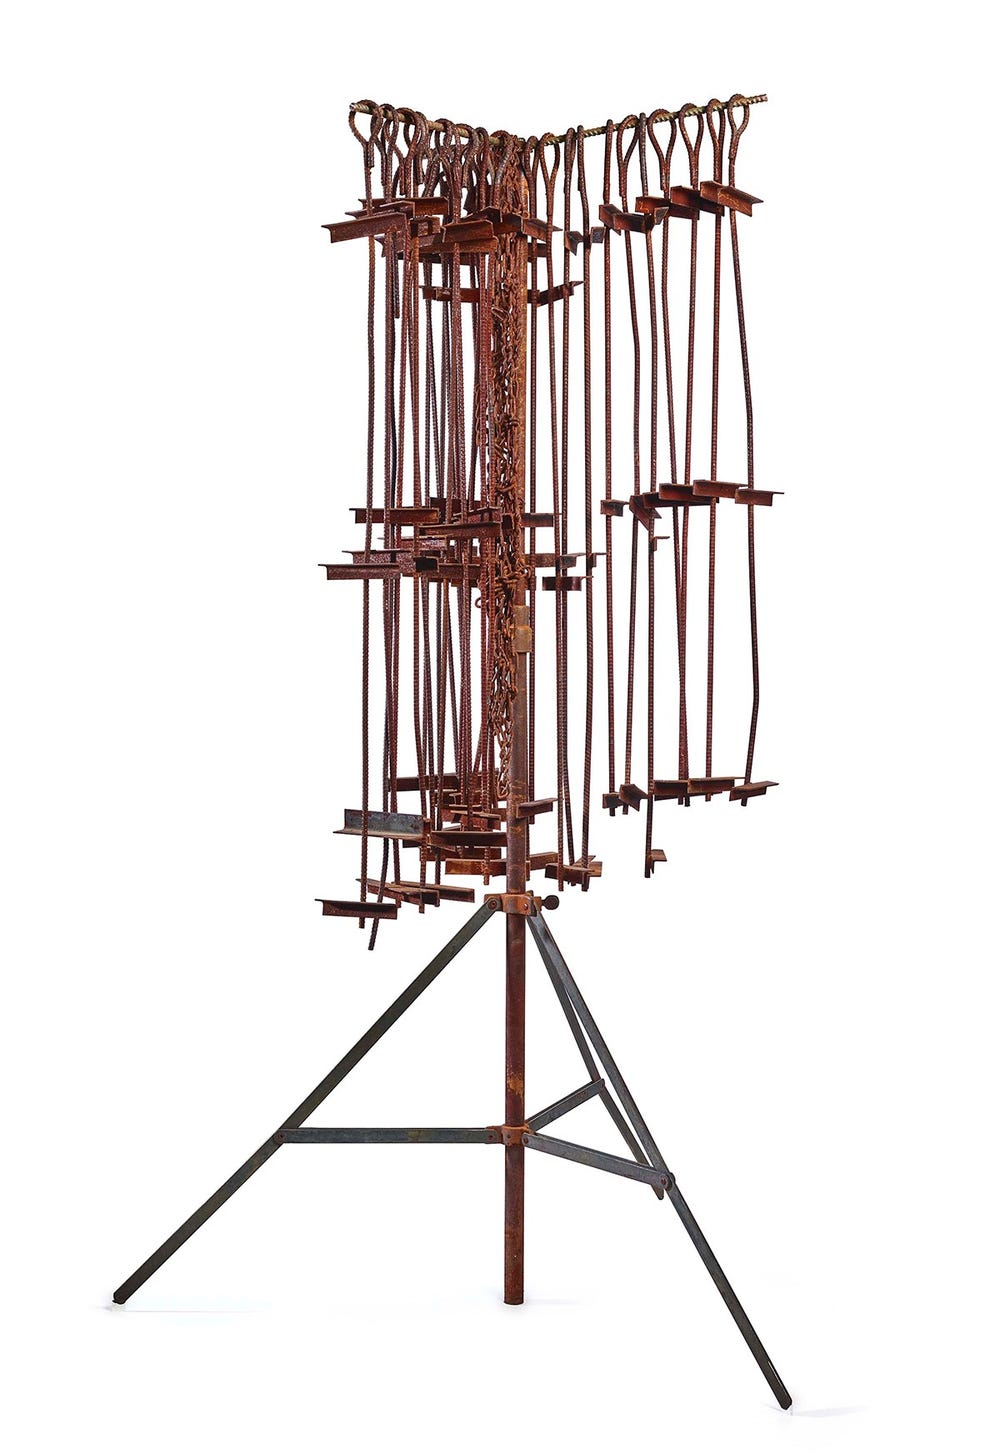 vertical pieces of steel hanging on a coatrack-like structure